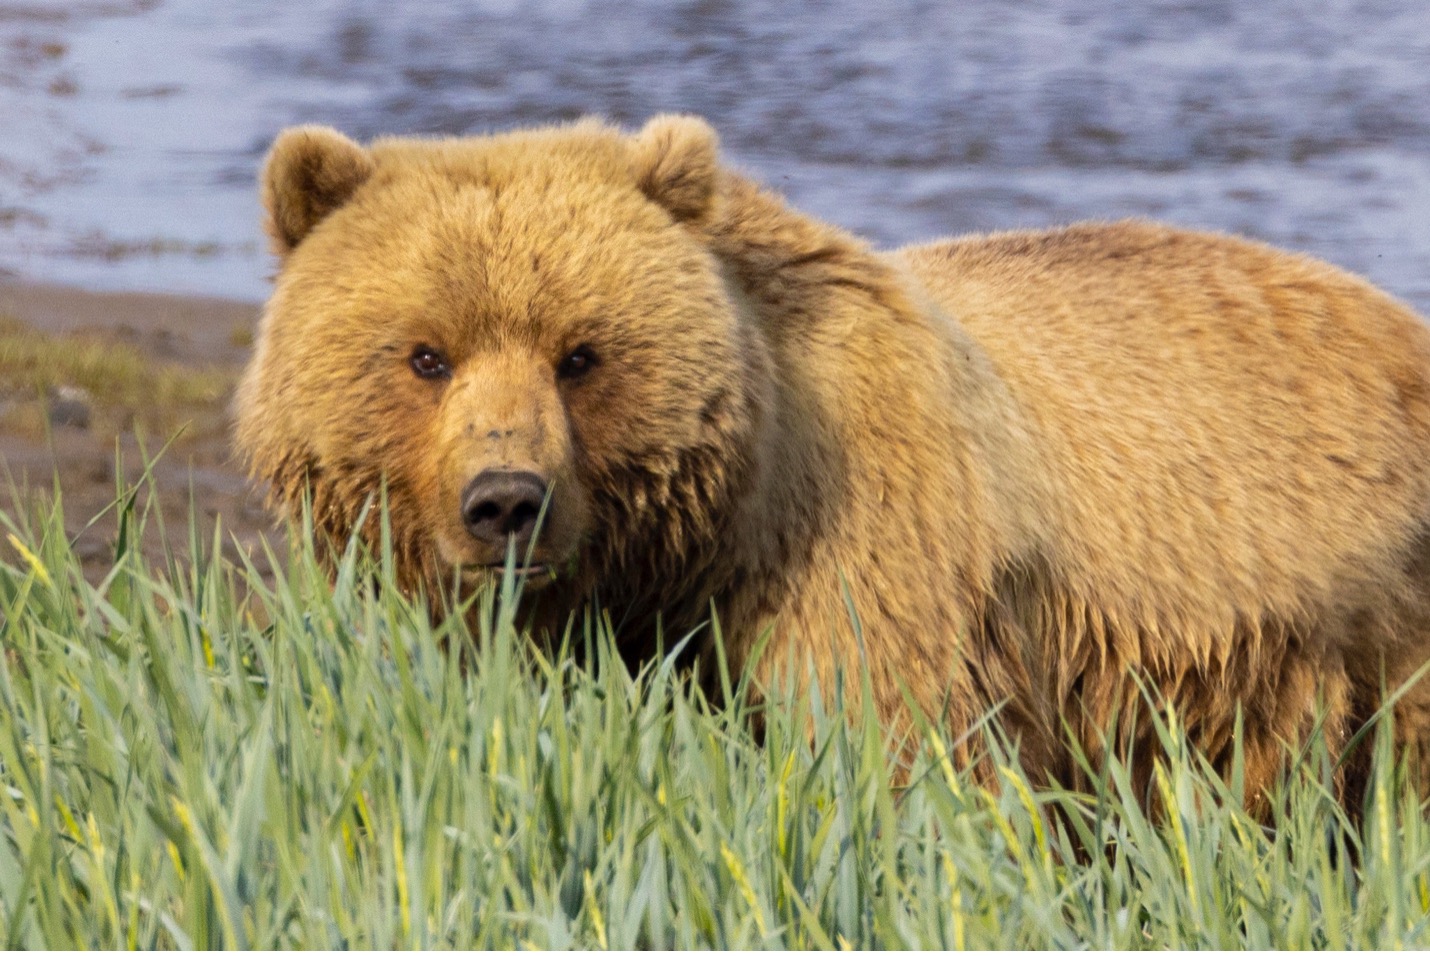 a close-up photo of a bear in lake clark national park